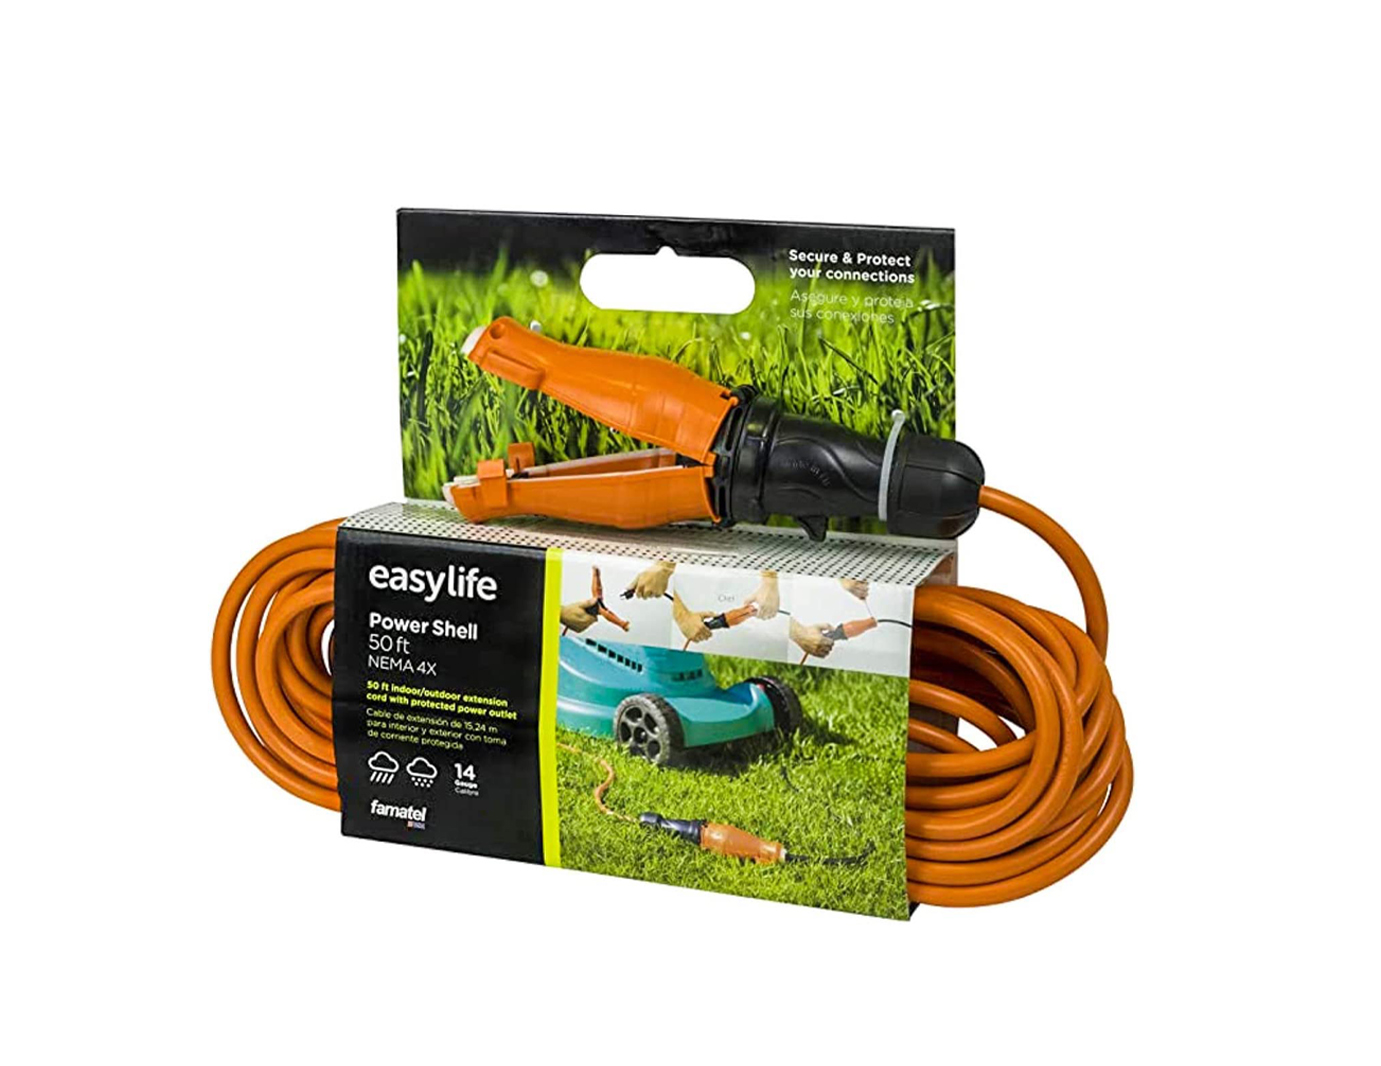 https://easylifeproduct.com/wp-content/uploads/2019/09/50-ft-Power-Shell-Extension-Cord-Safety-Seal-Easylife-Tech-1.jpg